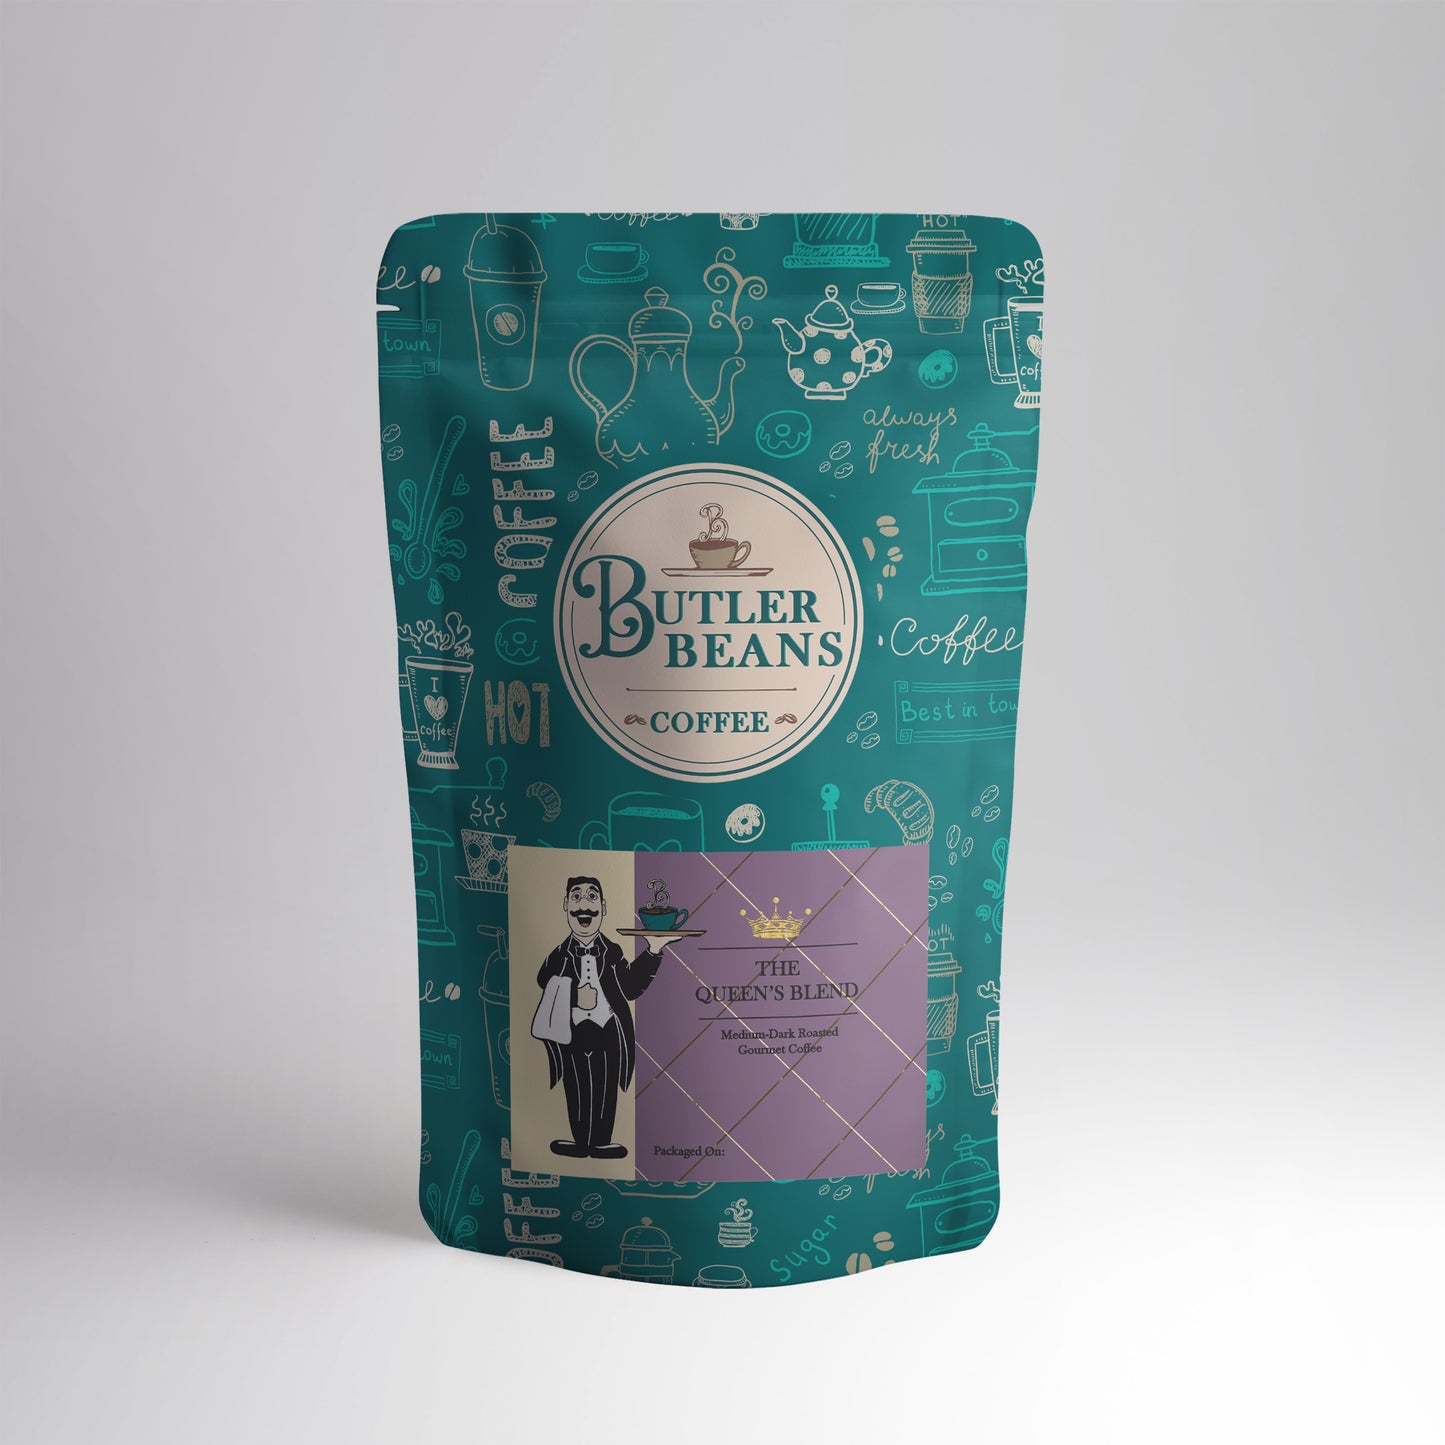 The Queen's Blend Coffee